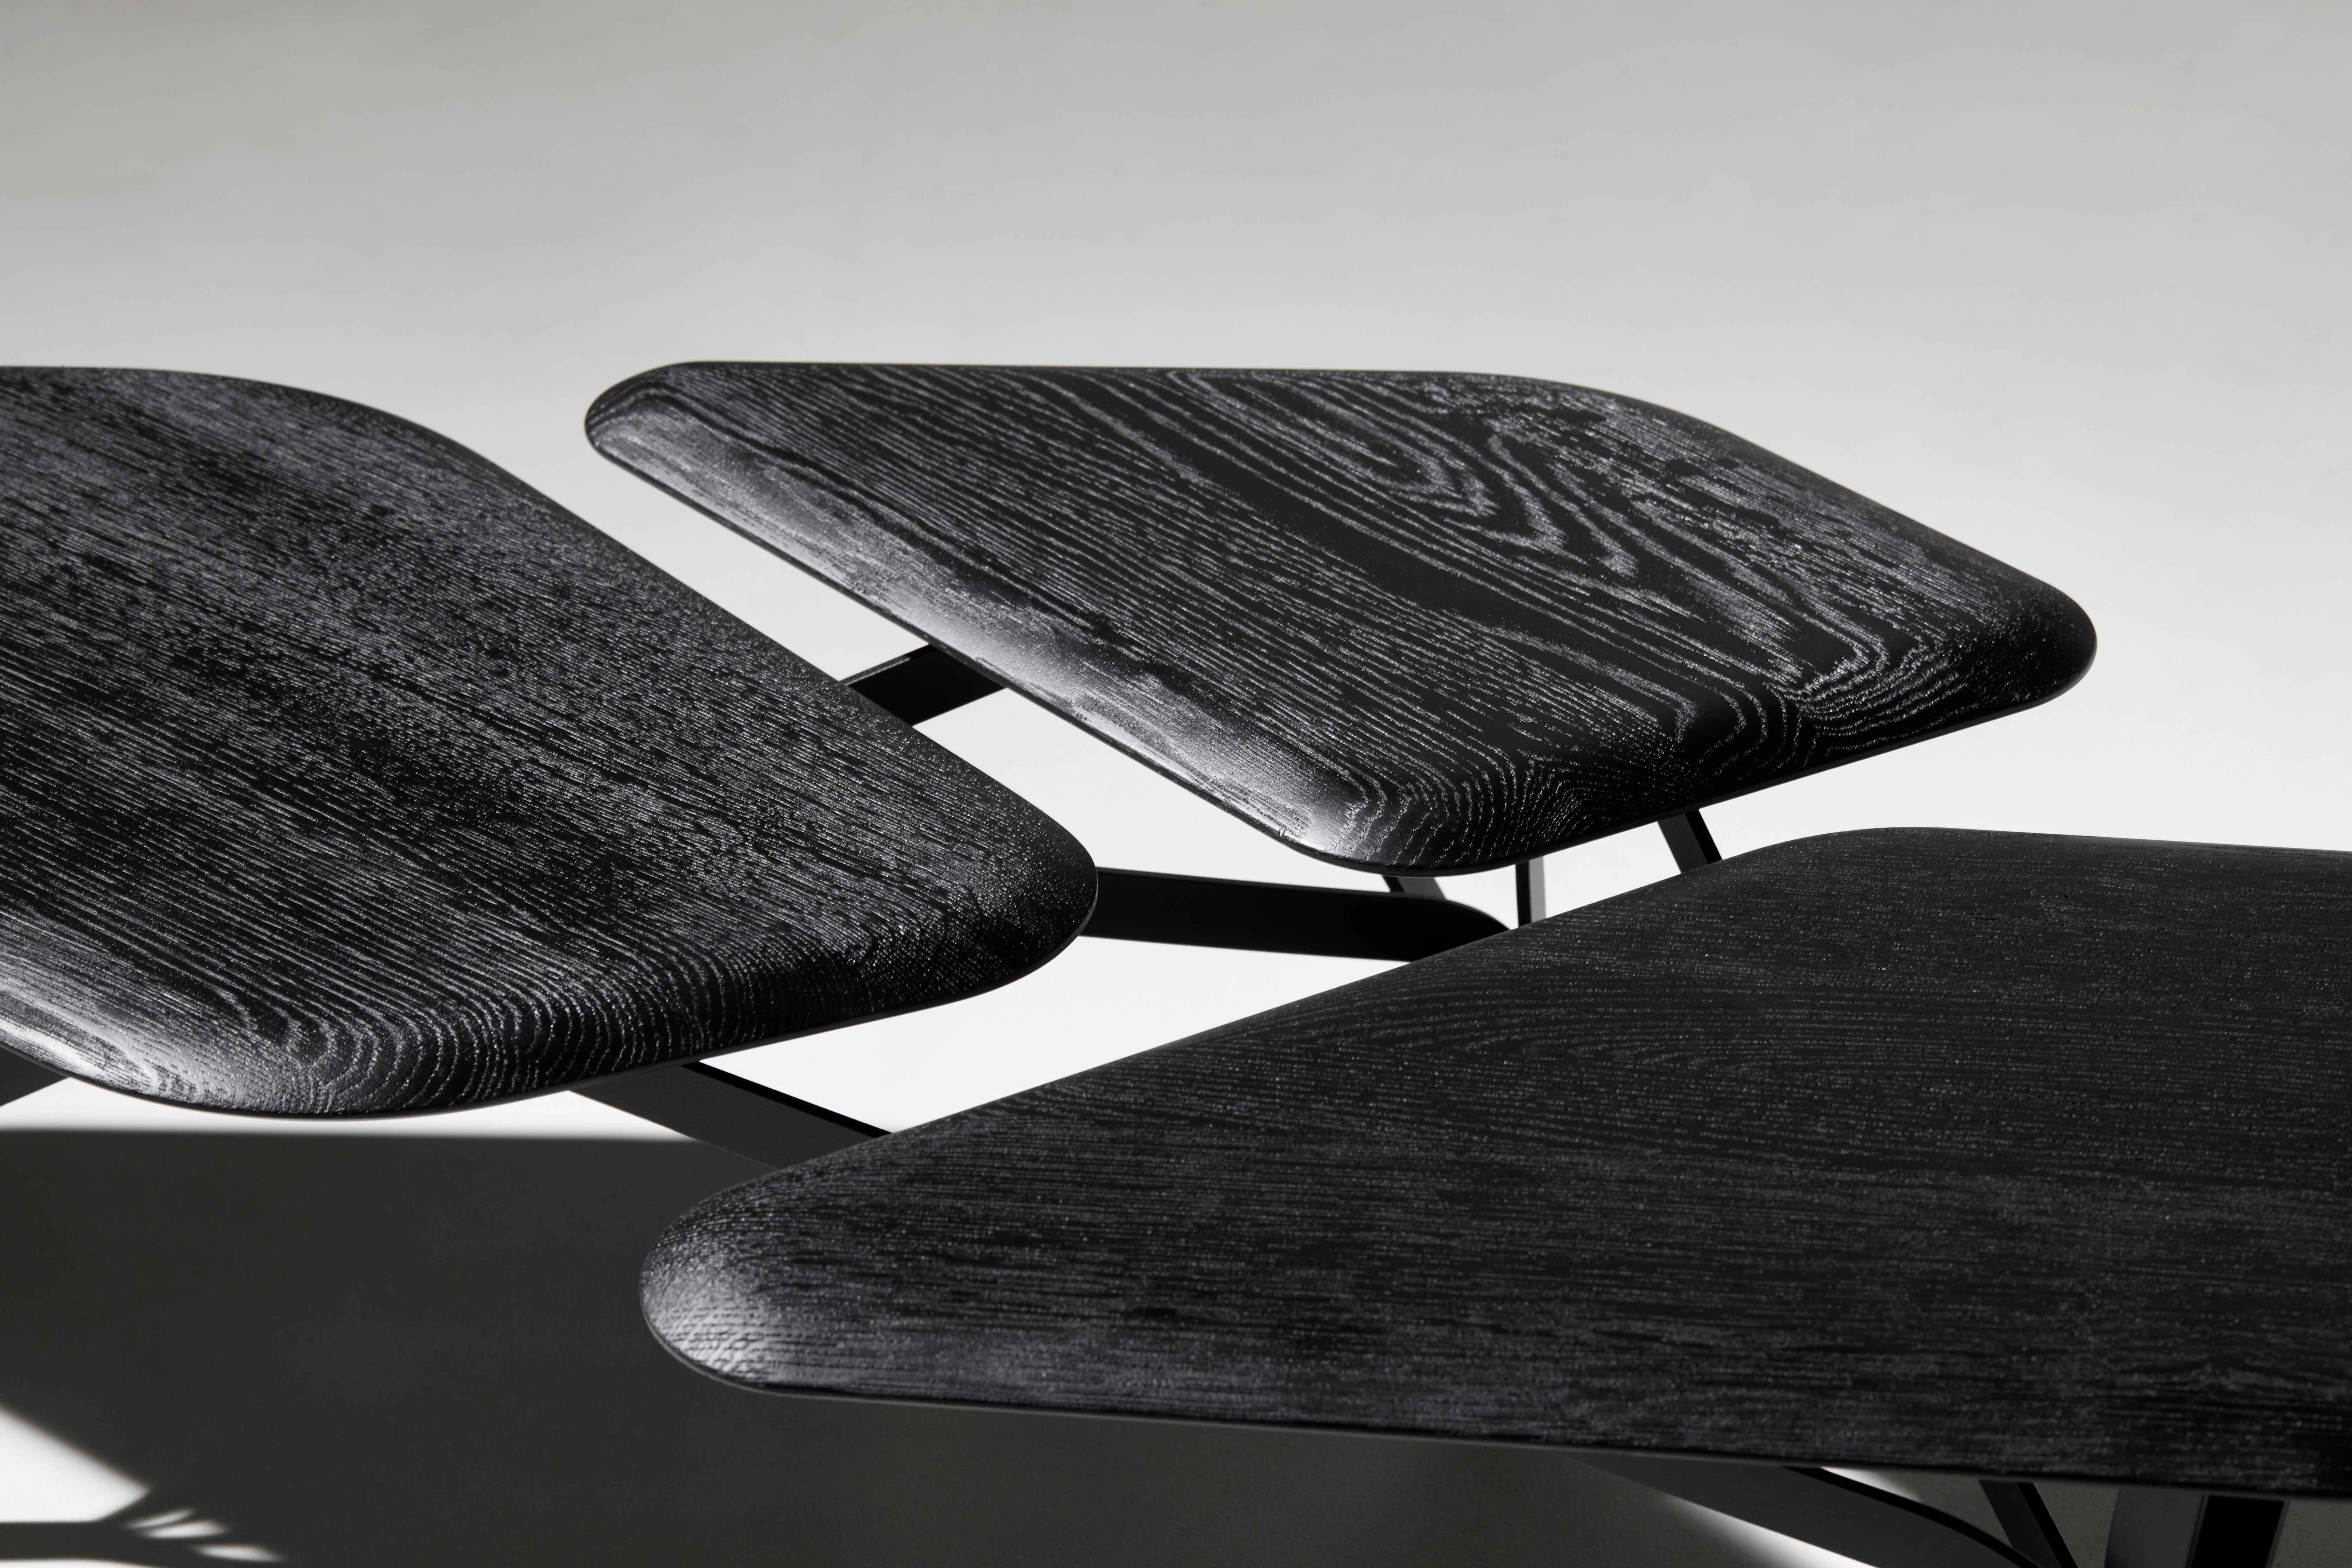 Organic Modern Borghese Coffee Table, Black Wood Top by Noé Duchaufour Lawrance for La Chance For Sale